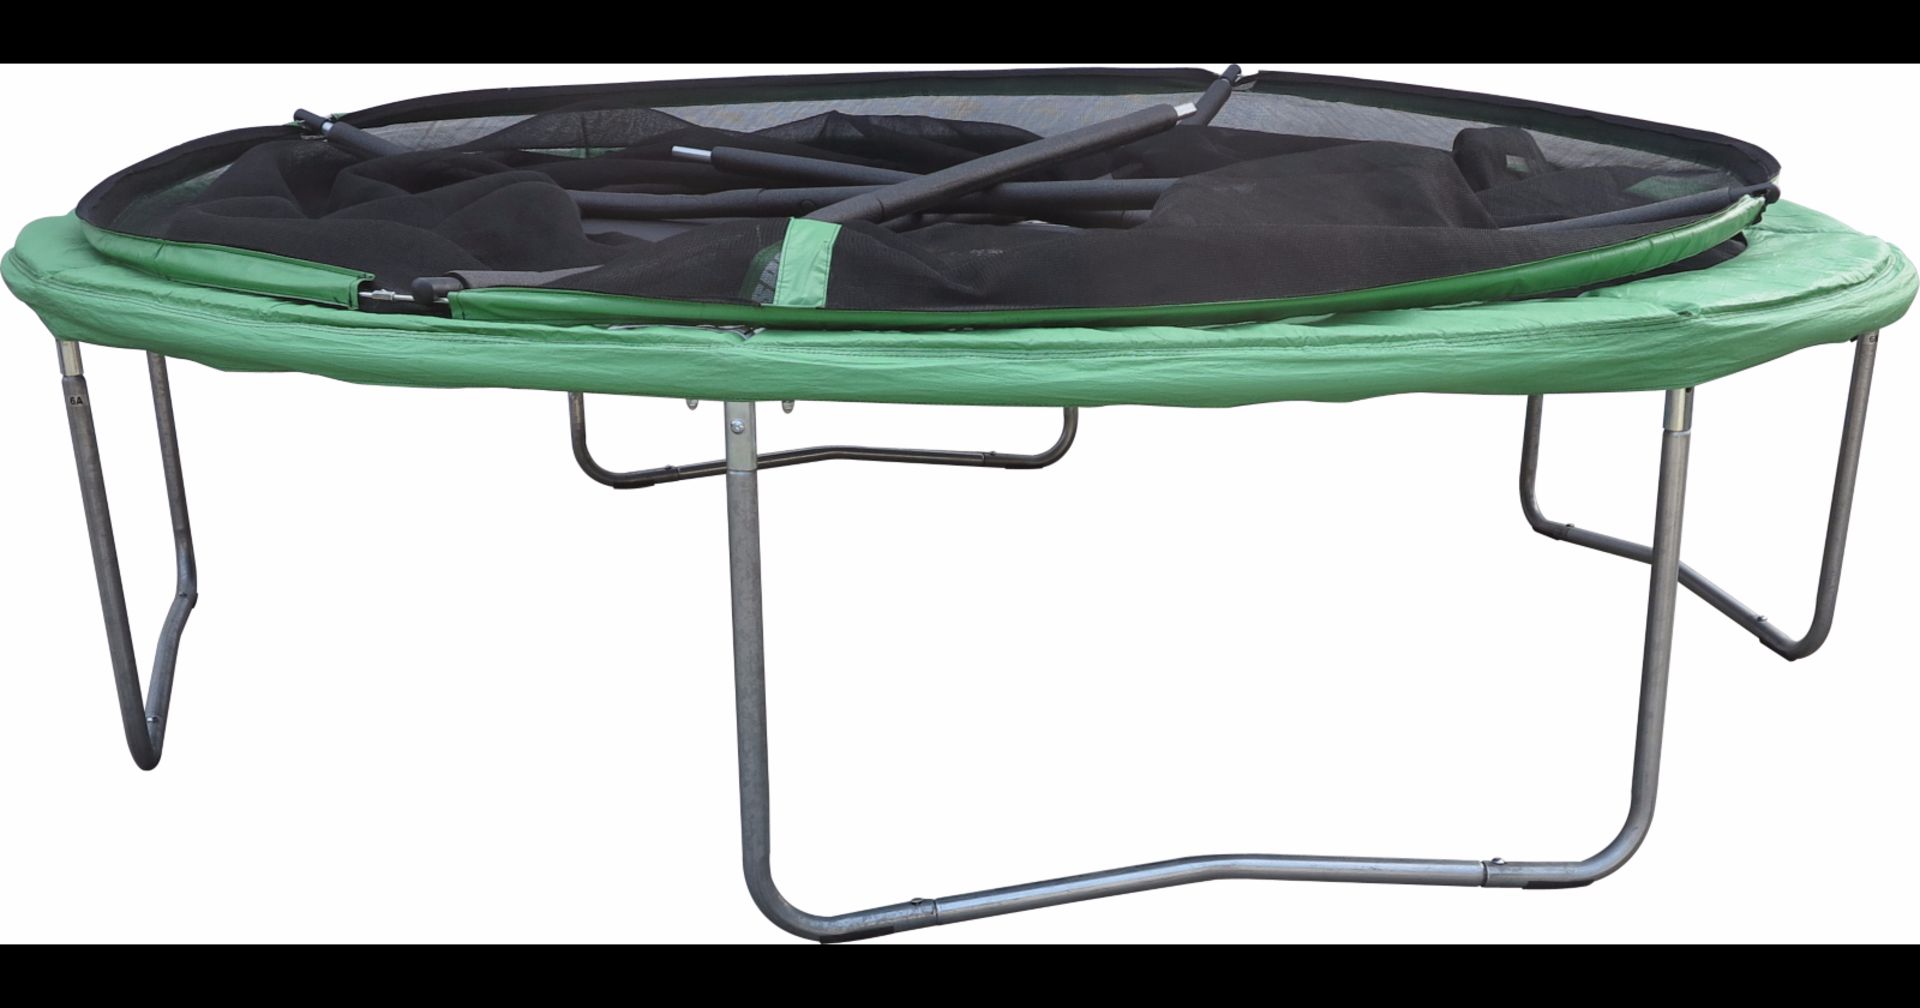 "Sportspower 10 ft Quad Lok Trampoline with Easi Store Enclosure and Flash Zone RRP_ Boxed_£194" - Image 2 of 3